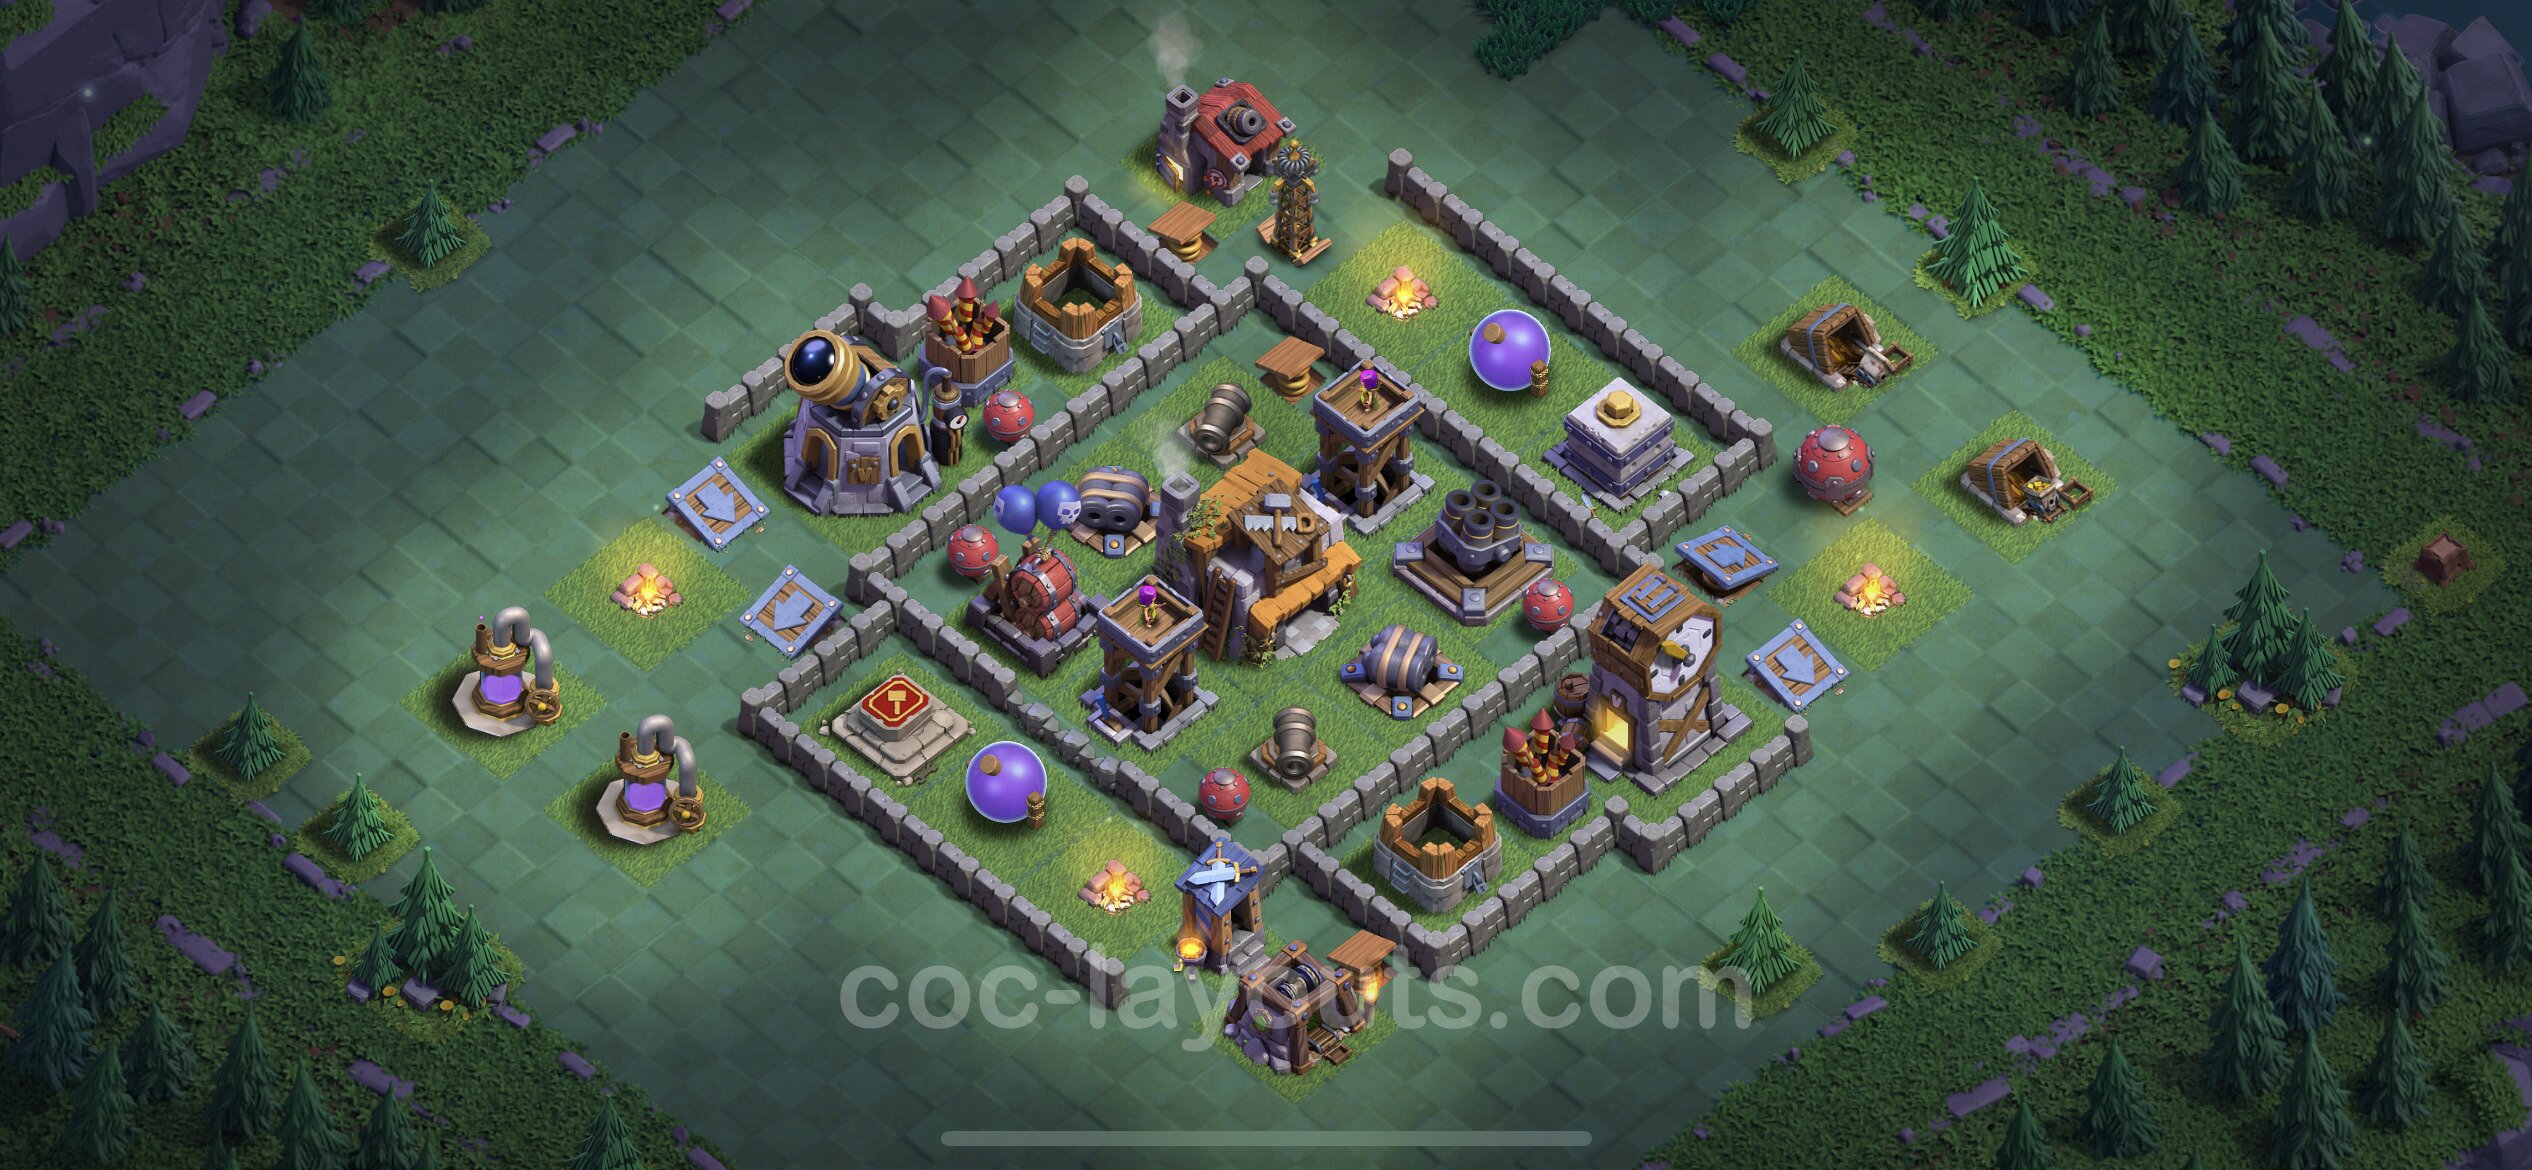 6th builder clash of clans